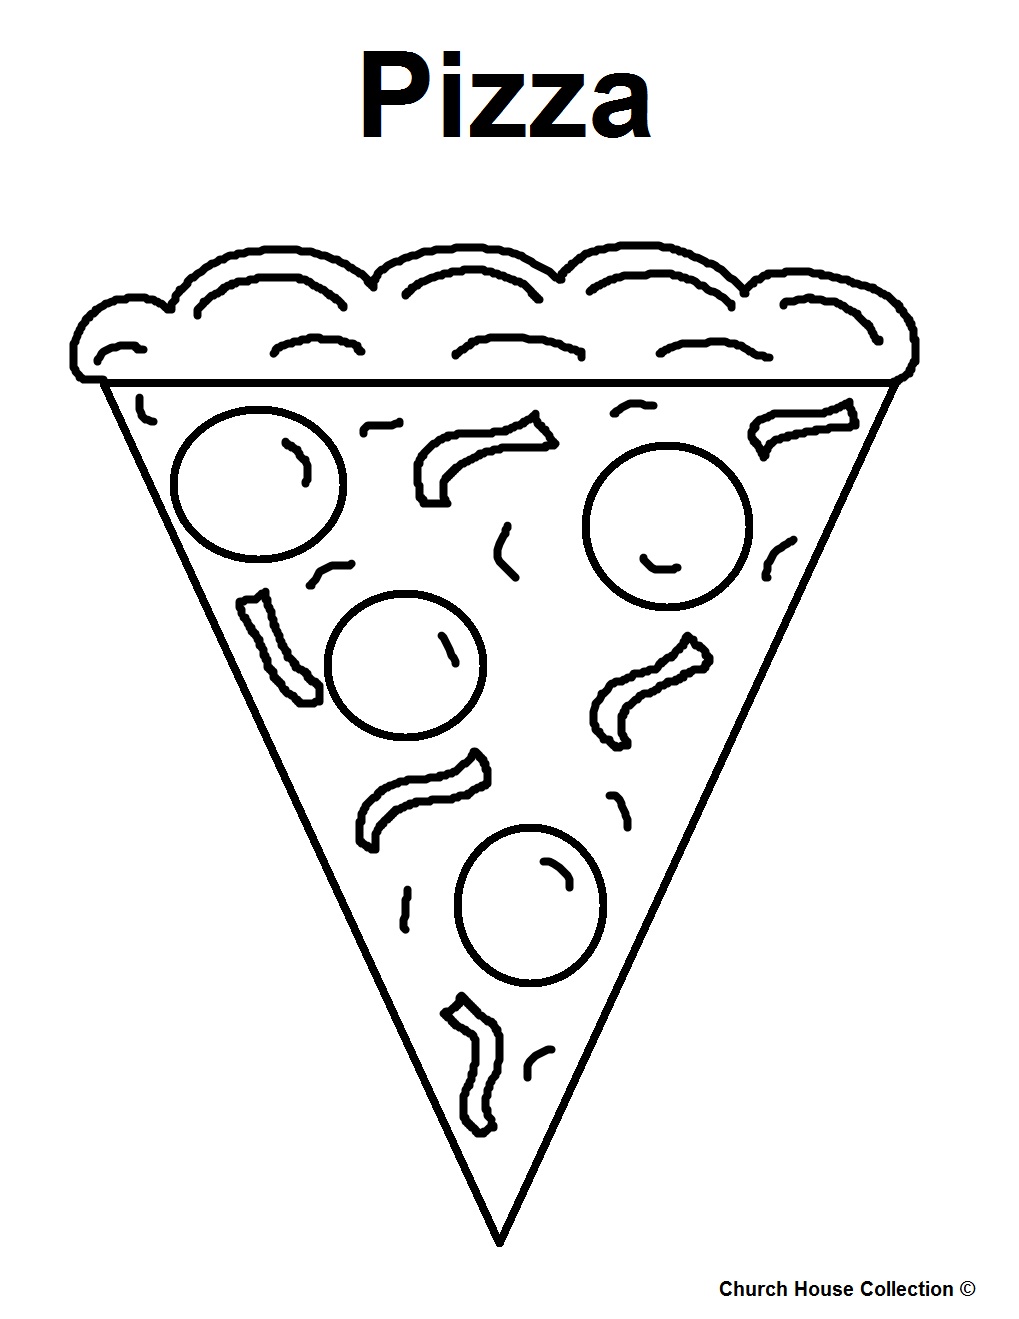  Pizza coloring pages | kids printable coloring pages | #1